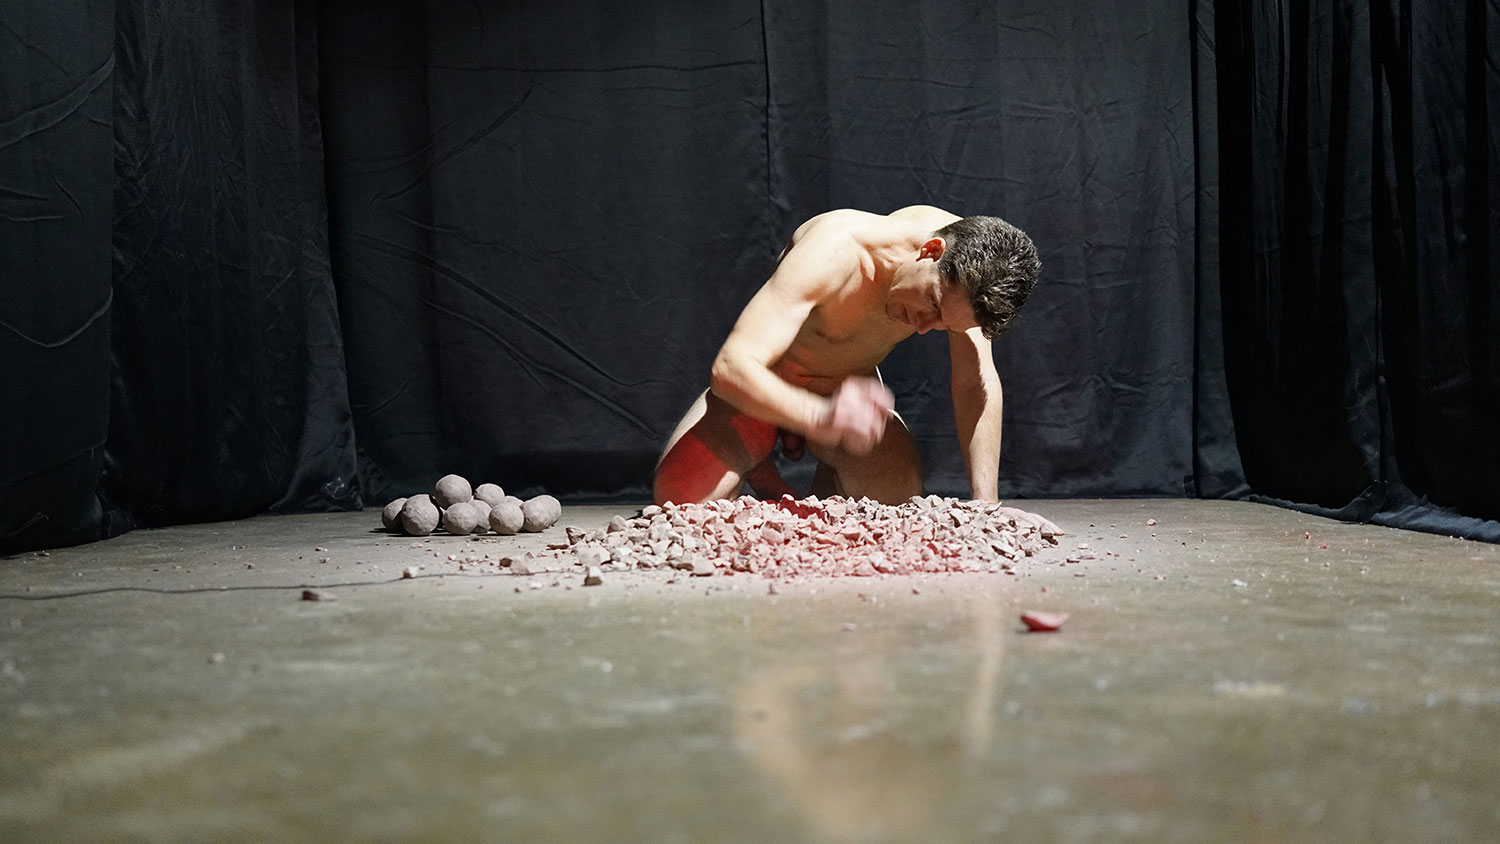 Ball Breaker, 2019, live performance at Experimental Action Festival<br><br>Go to menu, click VIDEOS, to watch excerpts<br><br>I break 100 ceramic balls (100 for its connotation: self-determination, independence, and infinite potential).